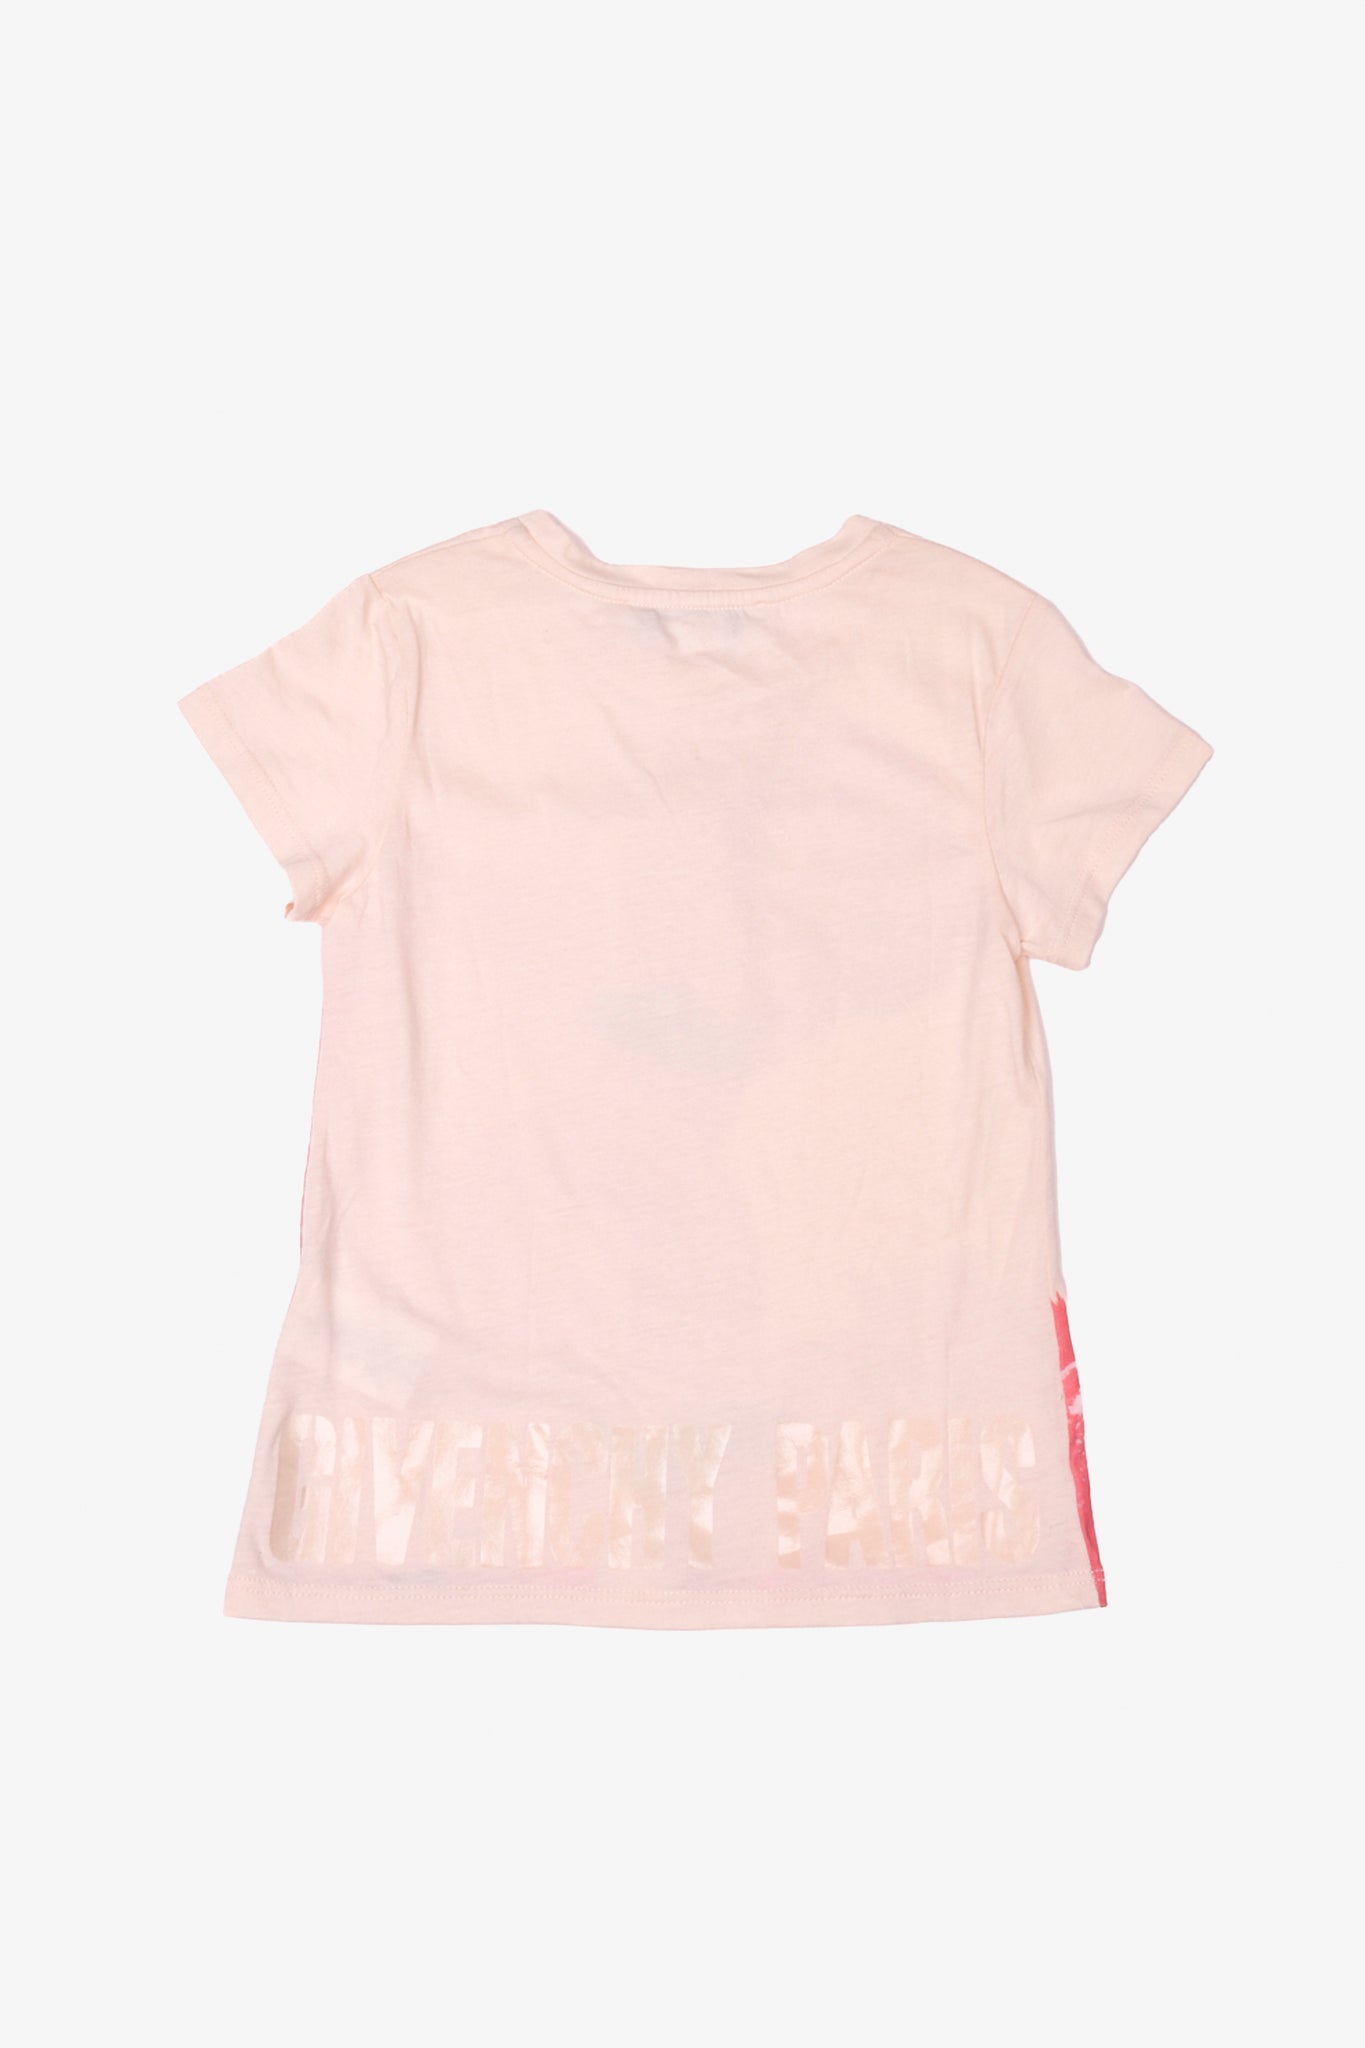 Givenchy Pink/Peach Flamingo Printed T-Shirt Size 6Y Kids